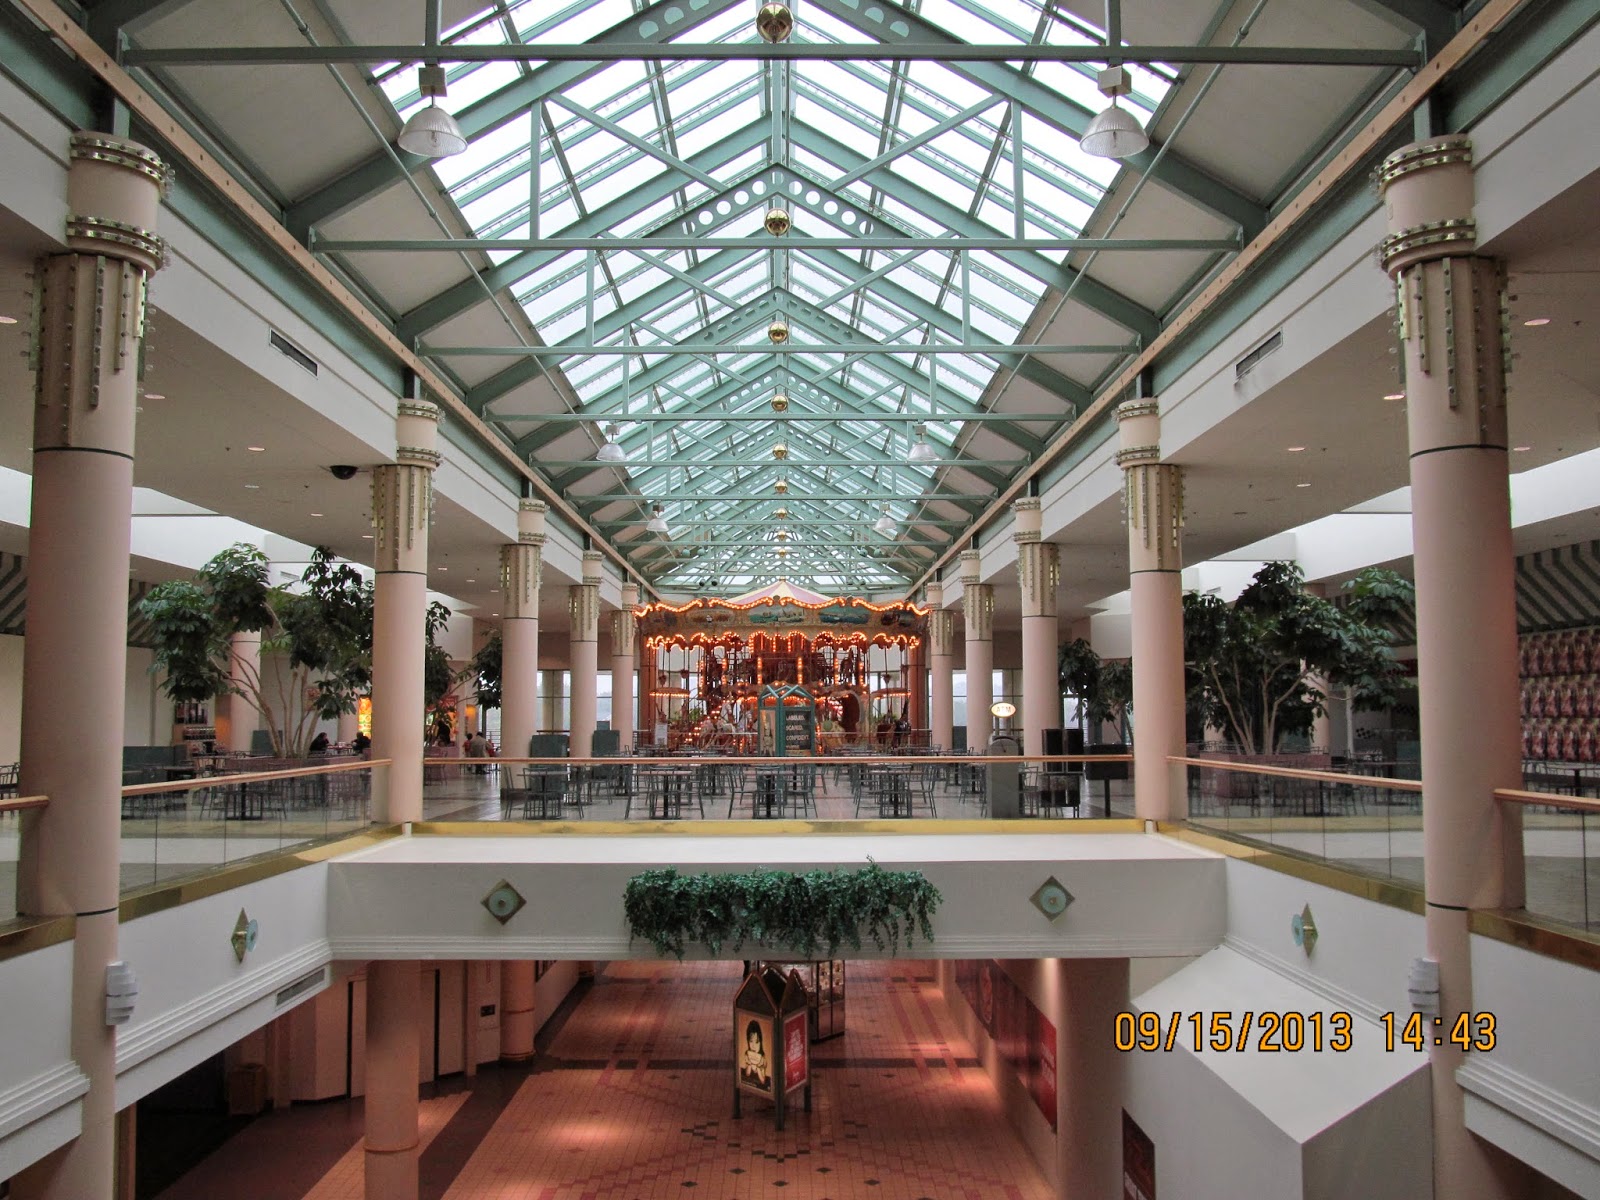 Trip to the Mall: Charlestowne Mall- (St. Charles, IL)